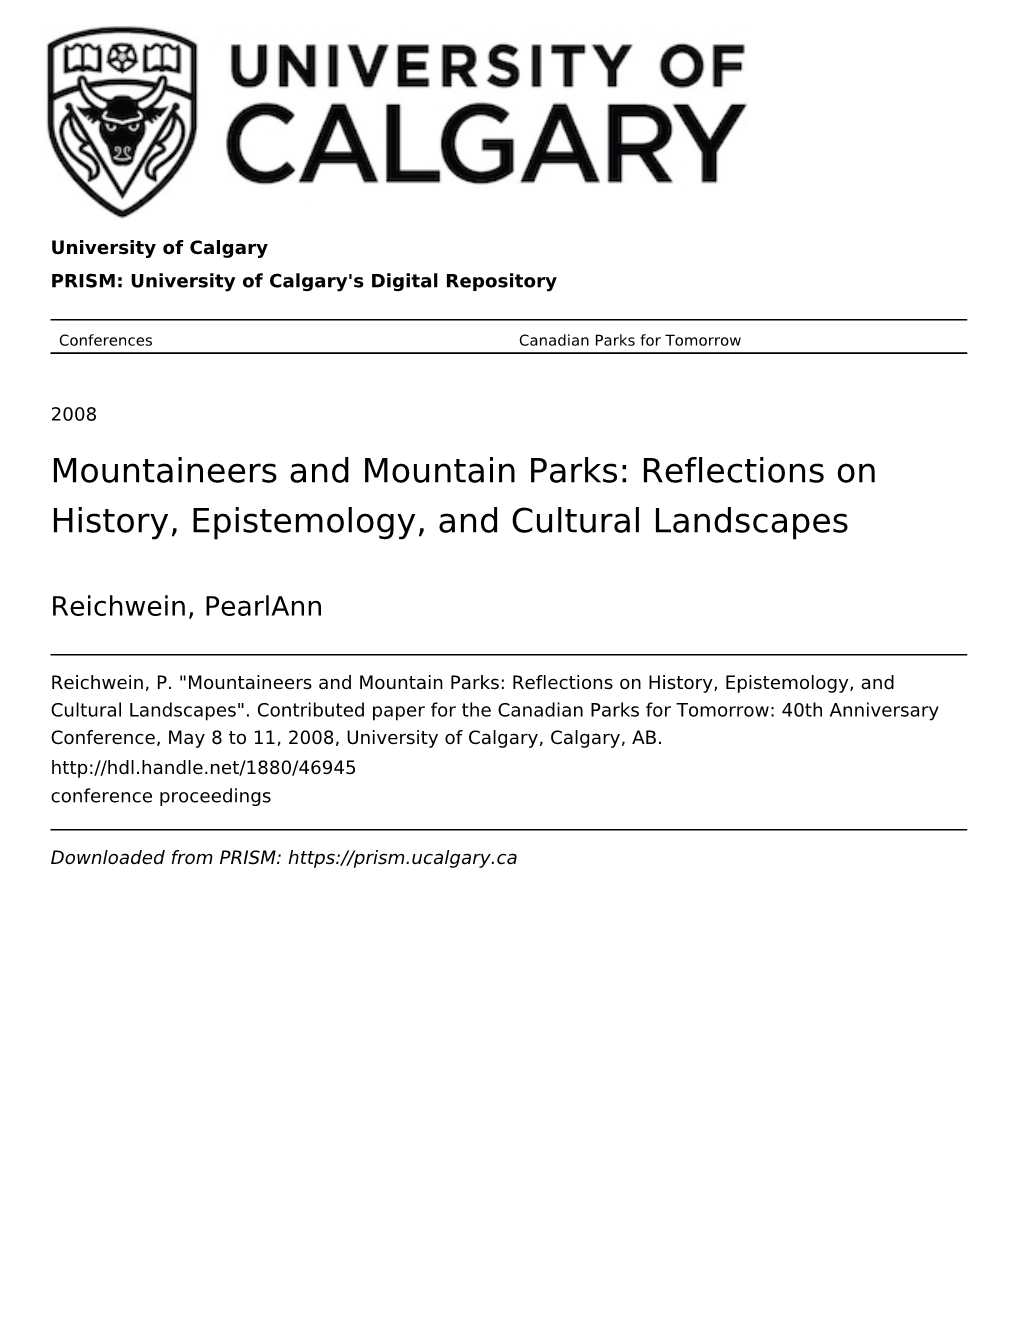 Mountaineers and Mountain Parks: Reflections on History, Epistemology, and Cultural Landscapes